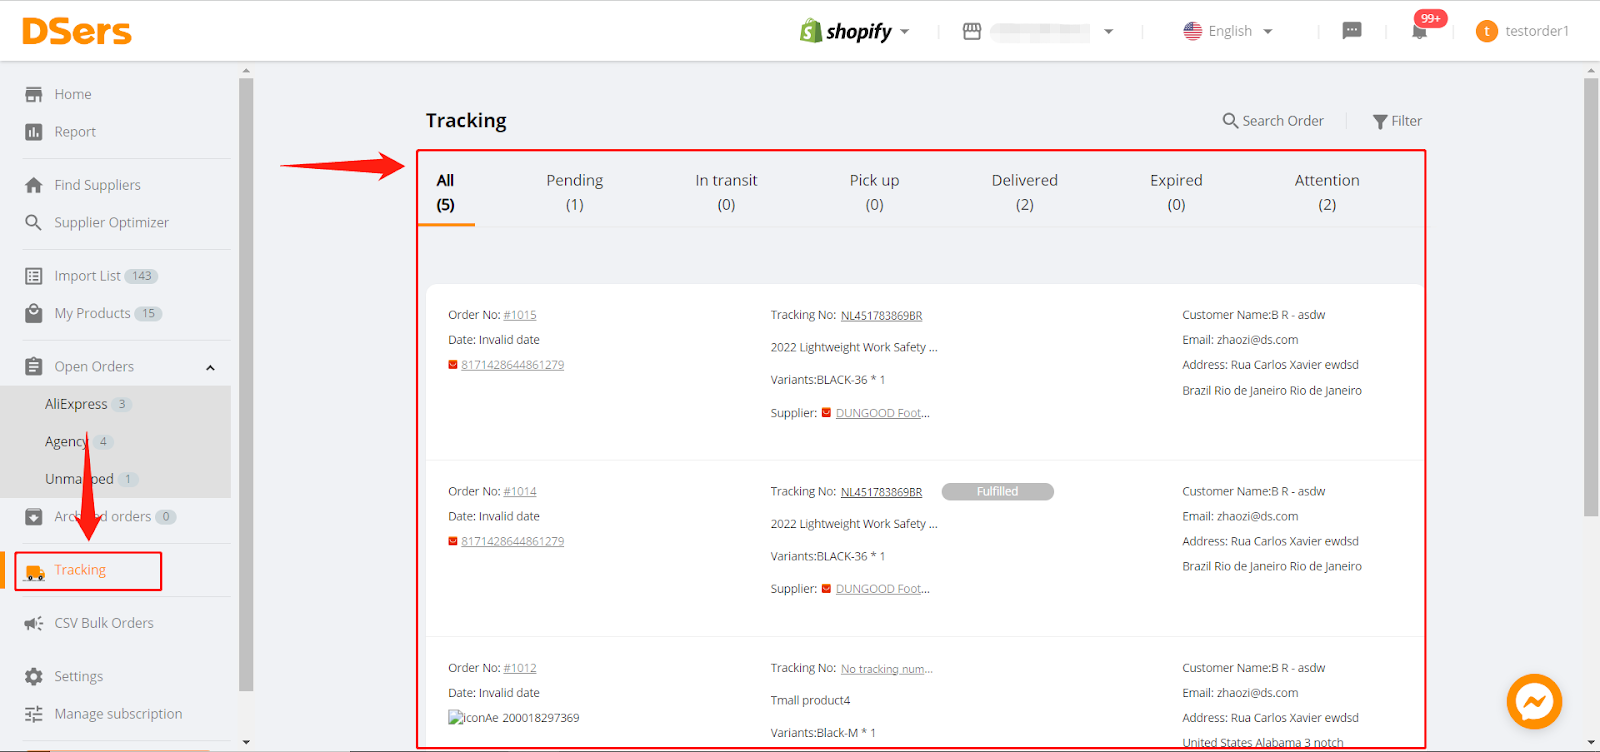 Get Your Dropship Tracking Streamlined with DSers - Track Order Shipment Status in Real-time - DSers